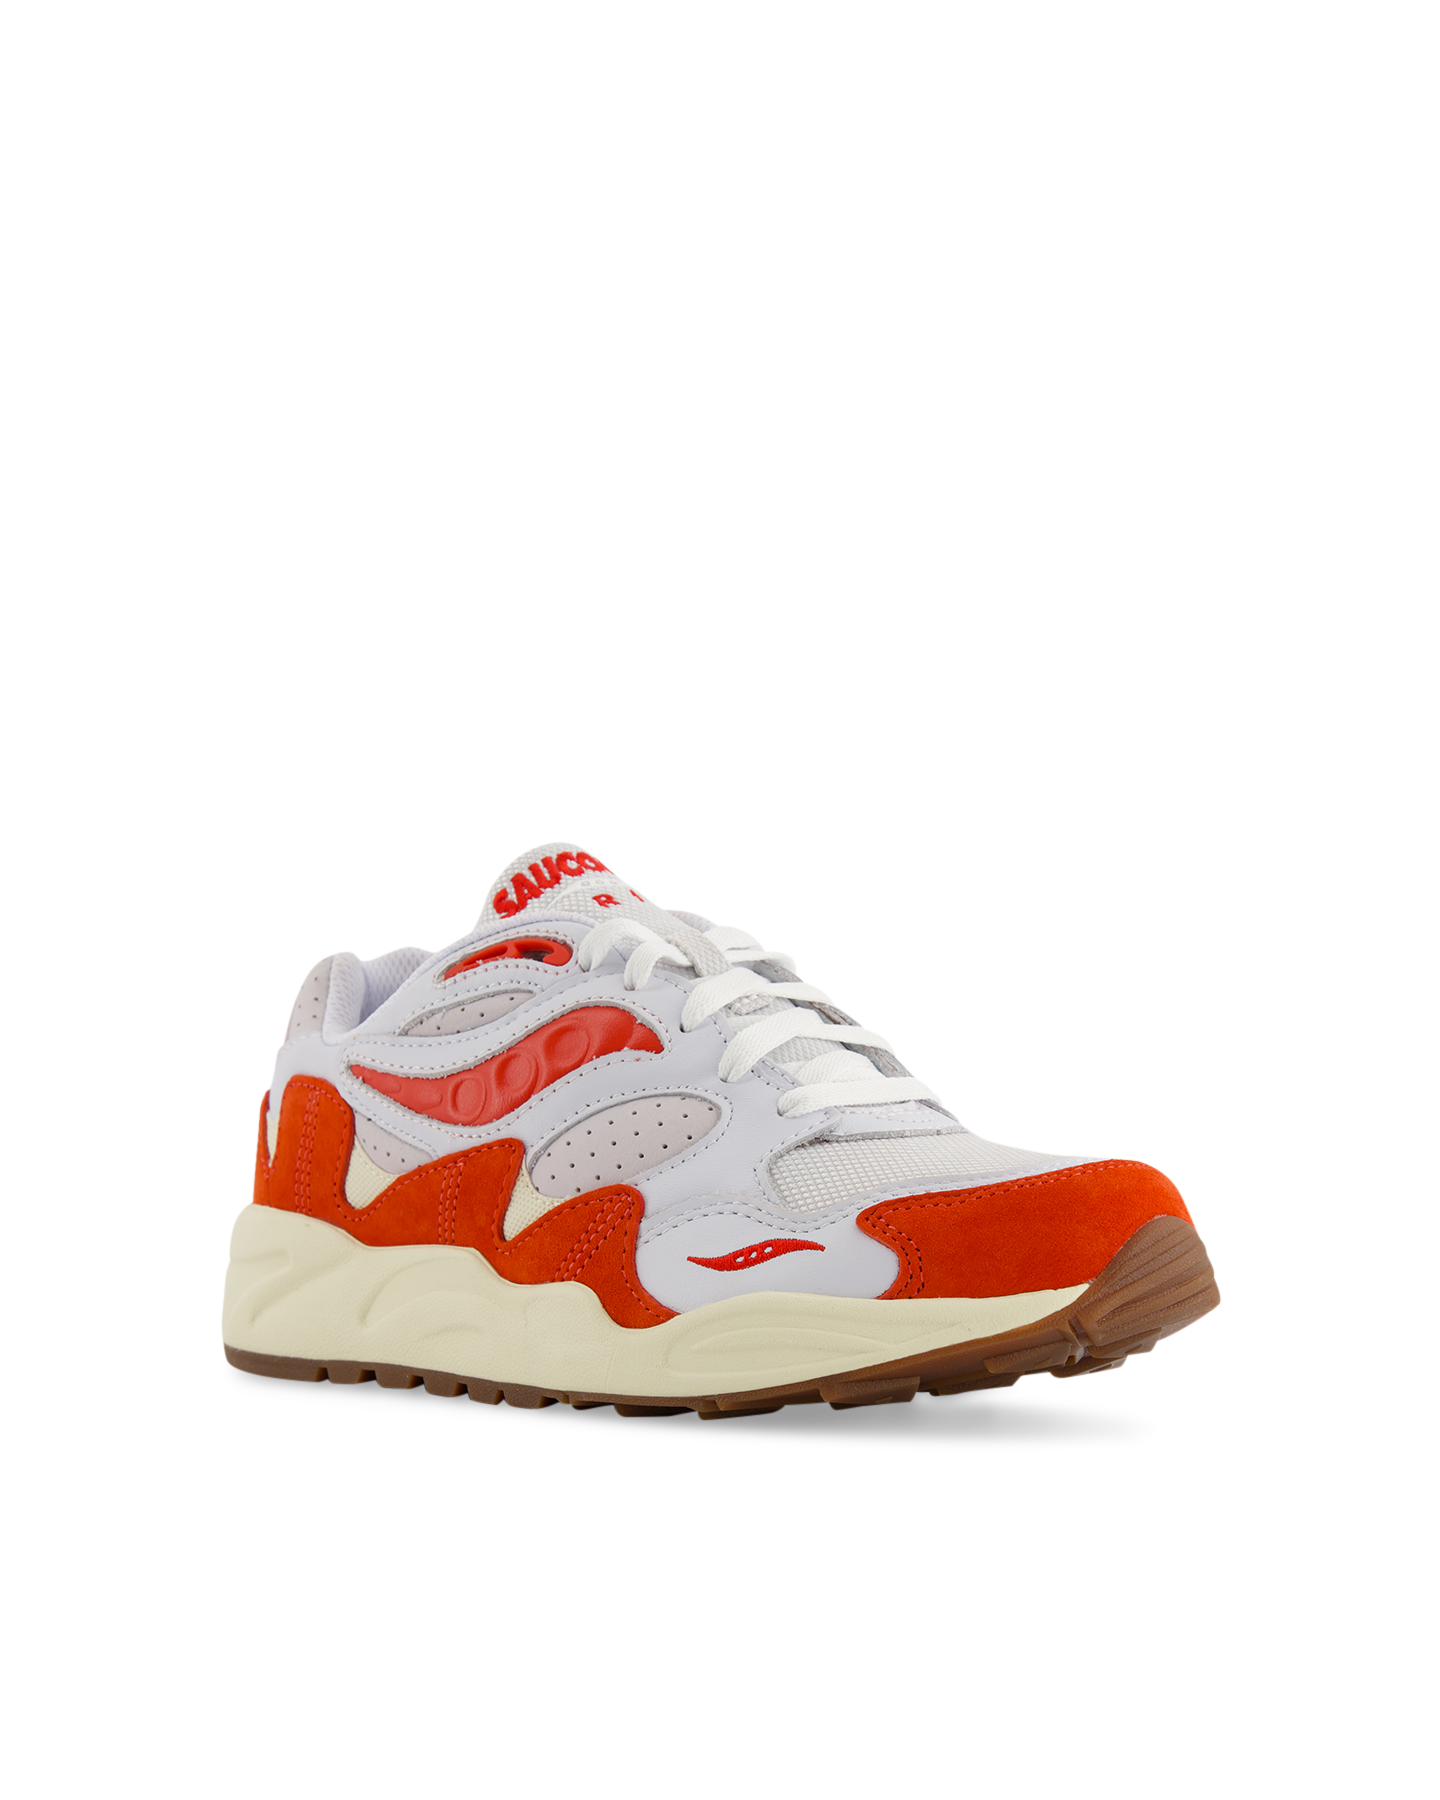 Saucony Grid Shadow 2 - White/Red ROOD 2